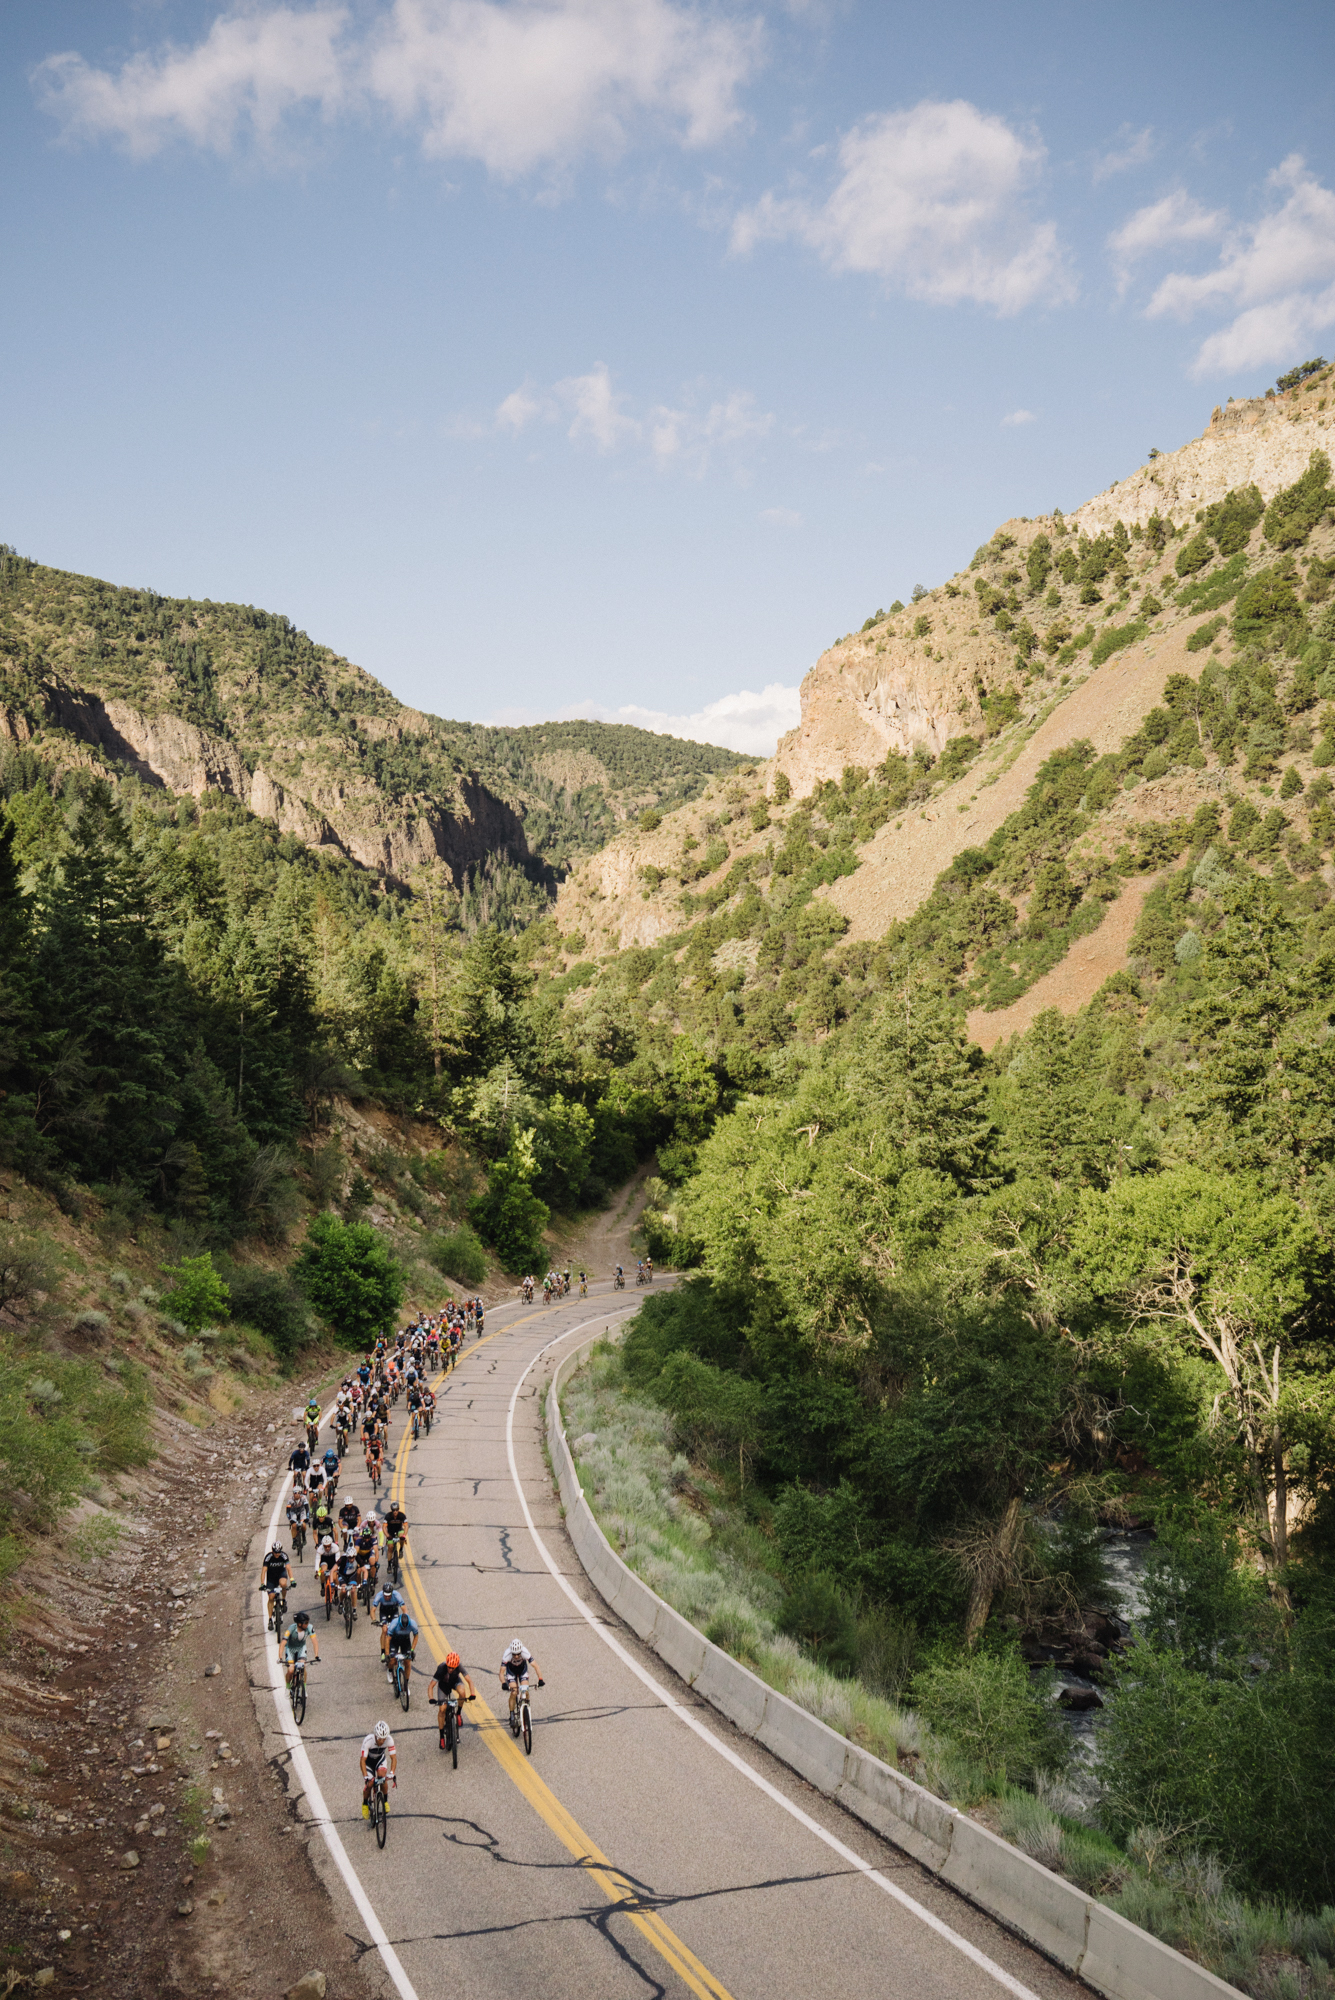 Super Tough Crusher in the Tushar to Feature Star-Studded Field – Race Set for July 9, 2016 in Beaver, Utah